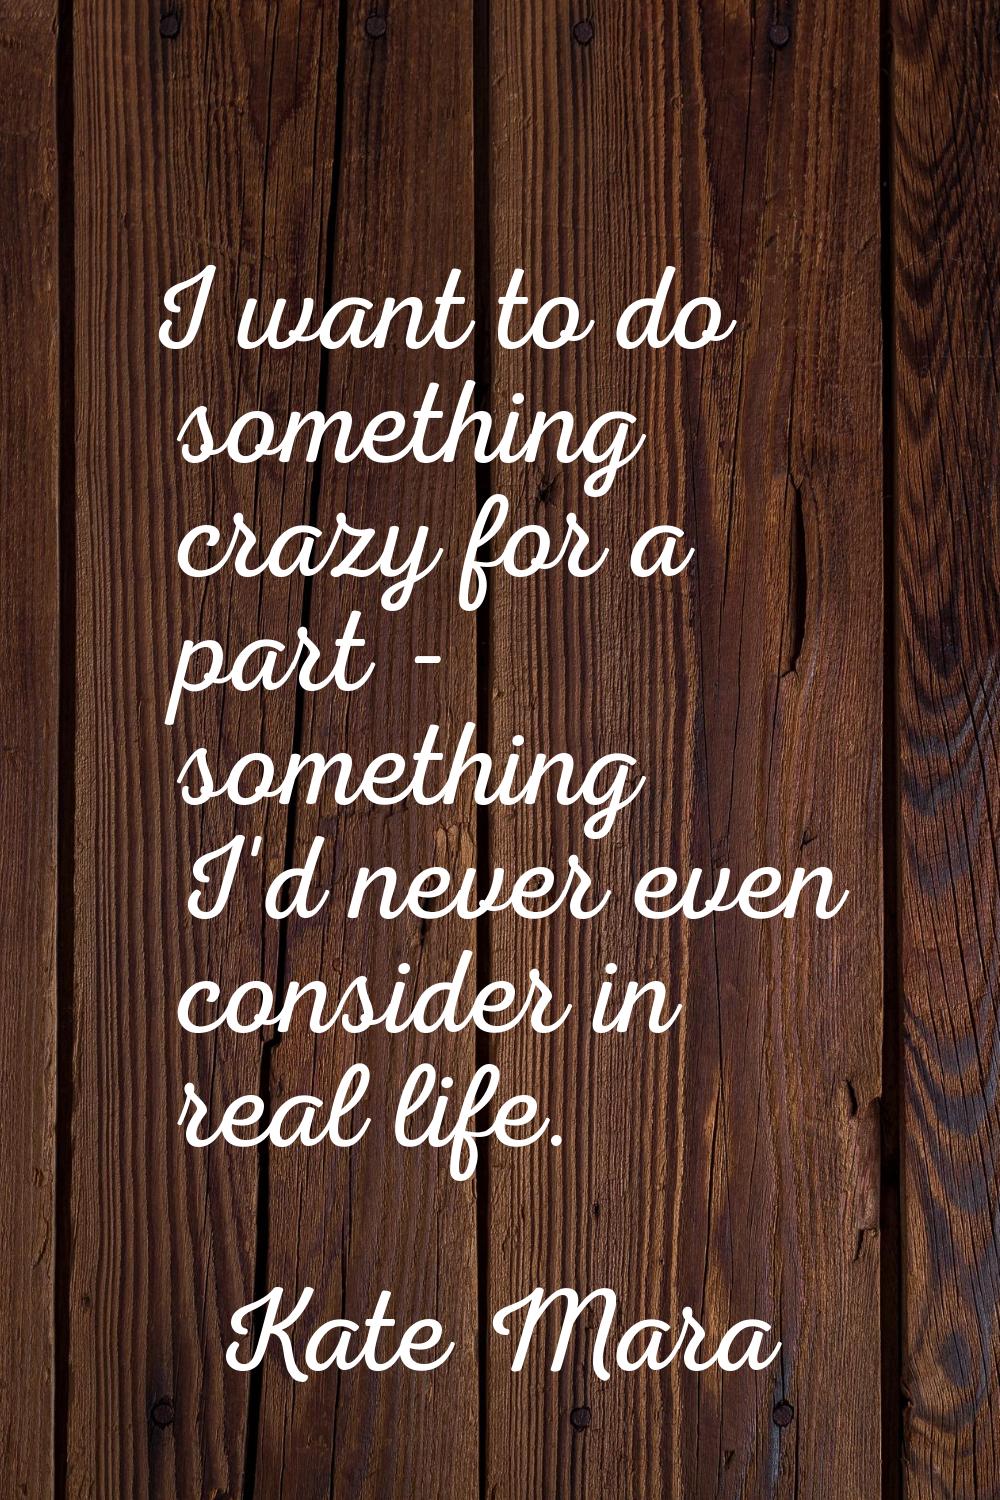 I want to do something crazy for a part - something I'd never even consider in real life.